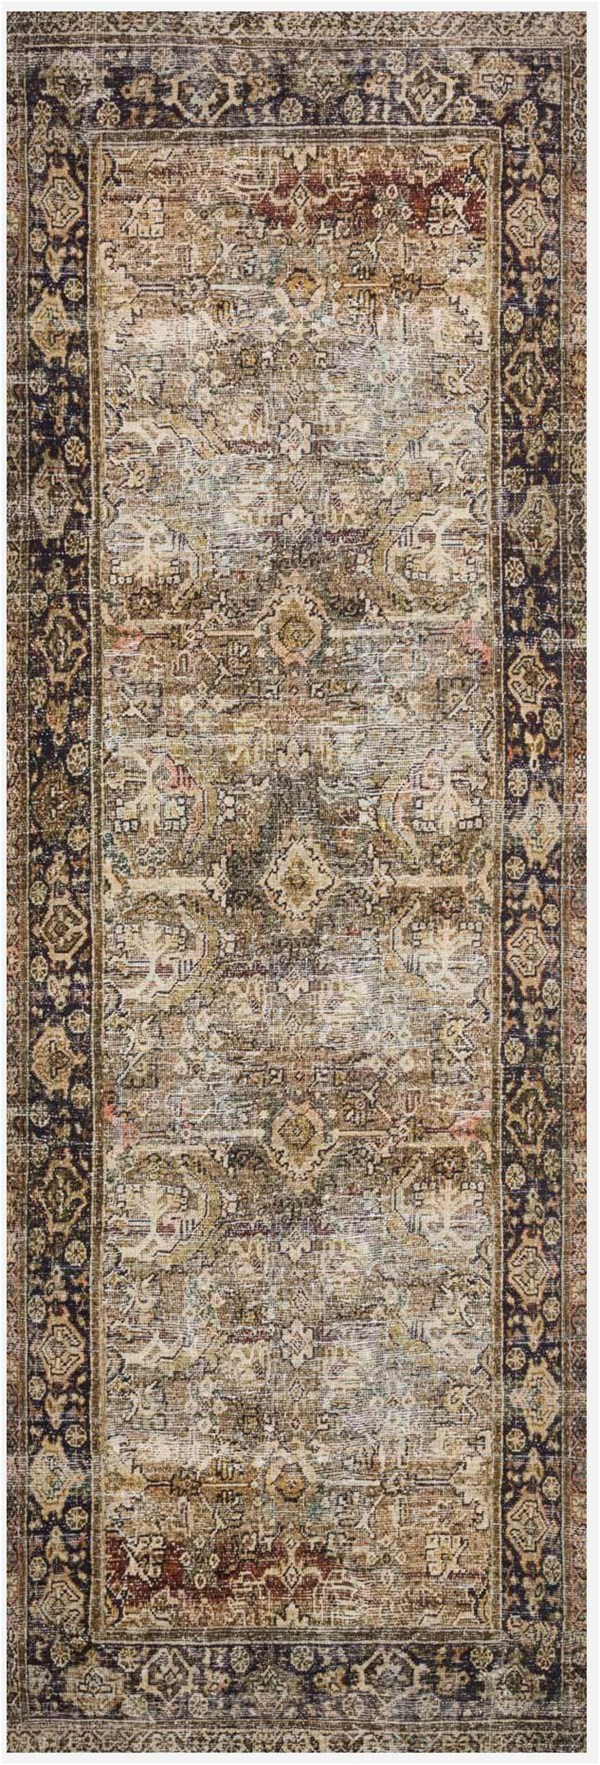 Area Rugs for Sale by Owner Loloi Ii Rugs Layla Printed Lay 03 area Rugs